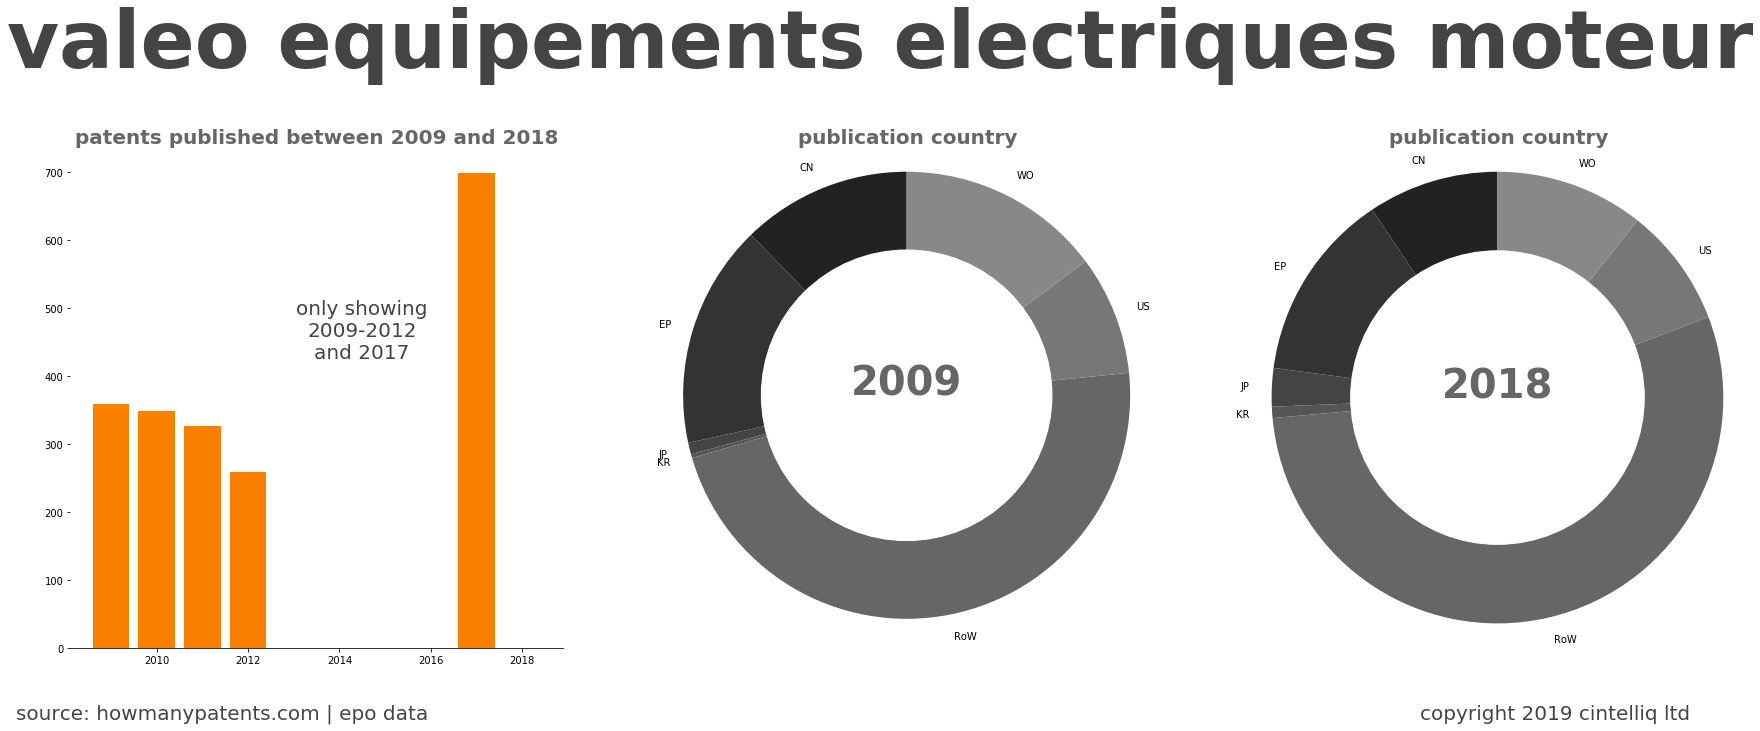 summary of patents for Valeo Equipements Electriques Moteur